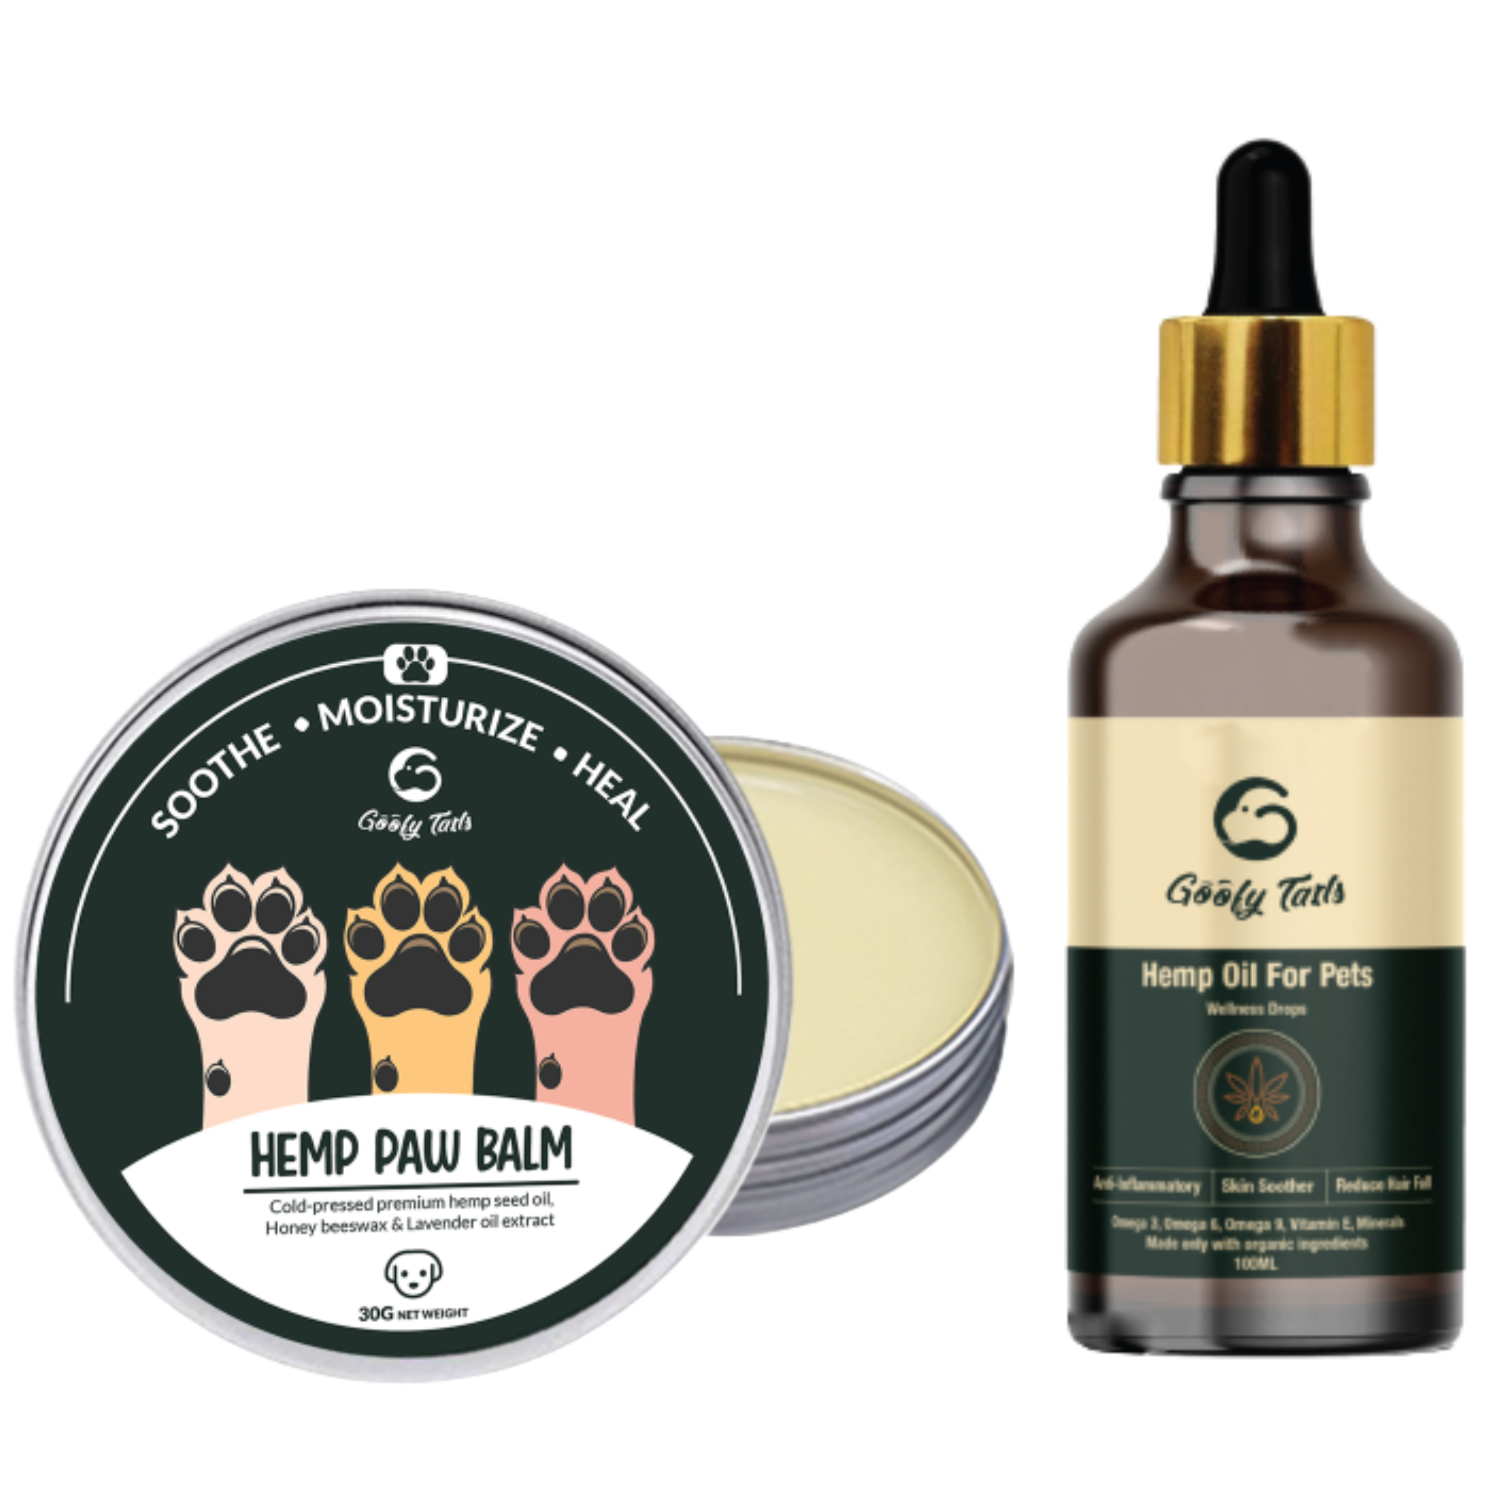 Presenting Goofy Tails Hemp paw Cream for Dogs and Hemp seed oil for dogs